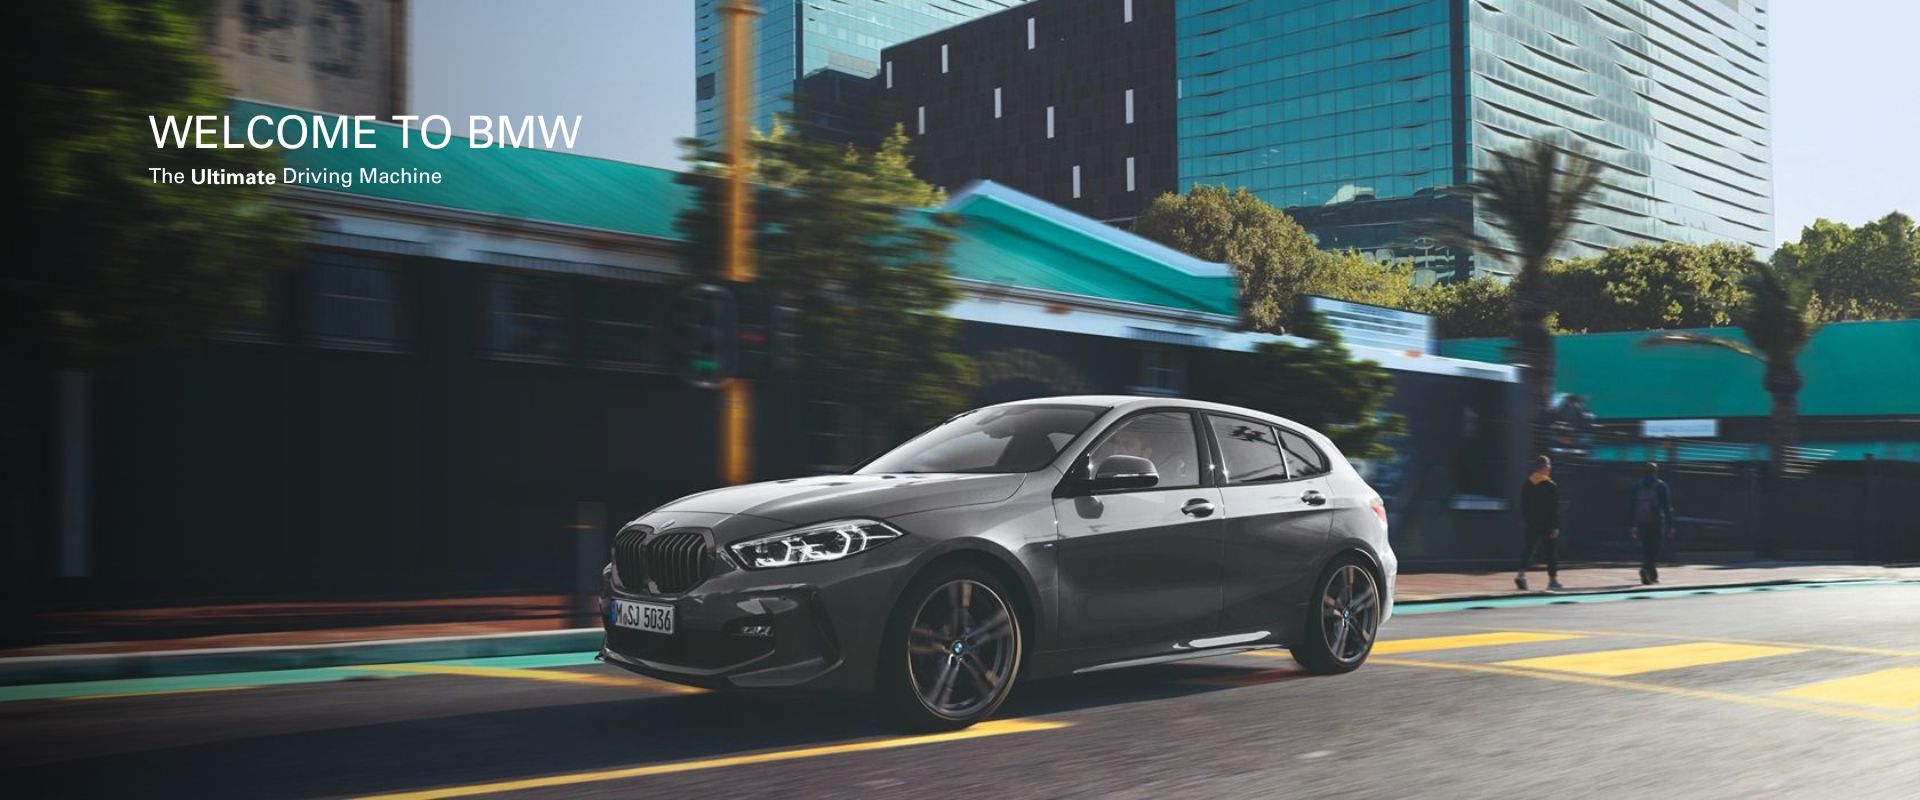 Welcome to BMW. The Ultimate Driving Machine.